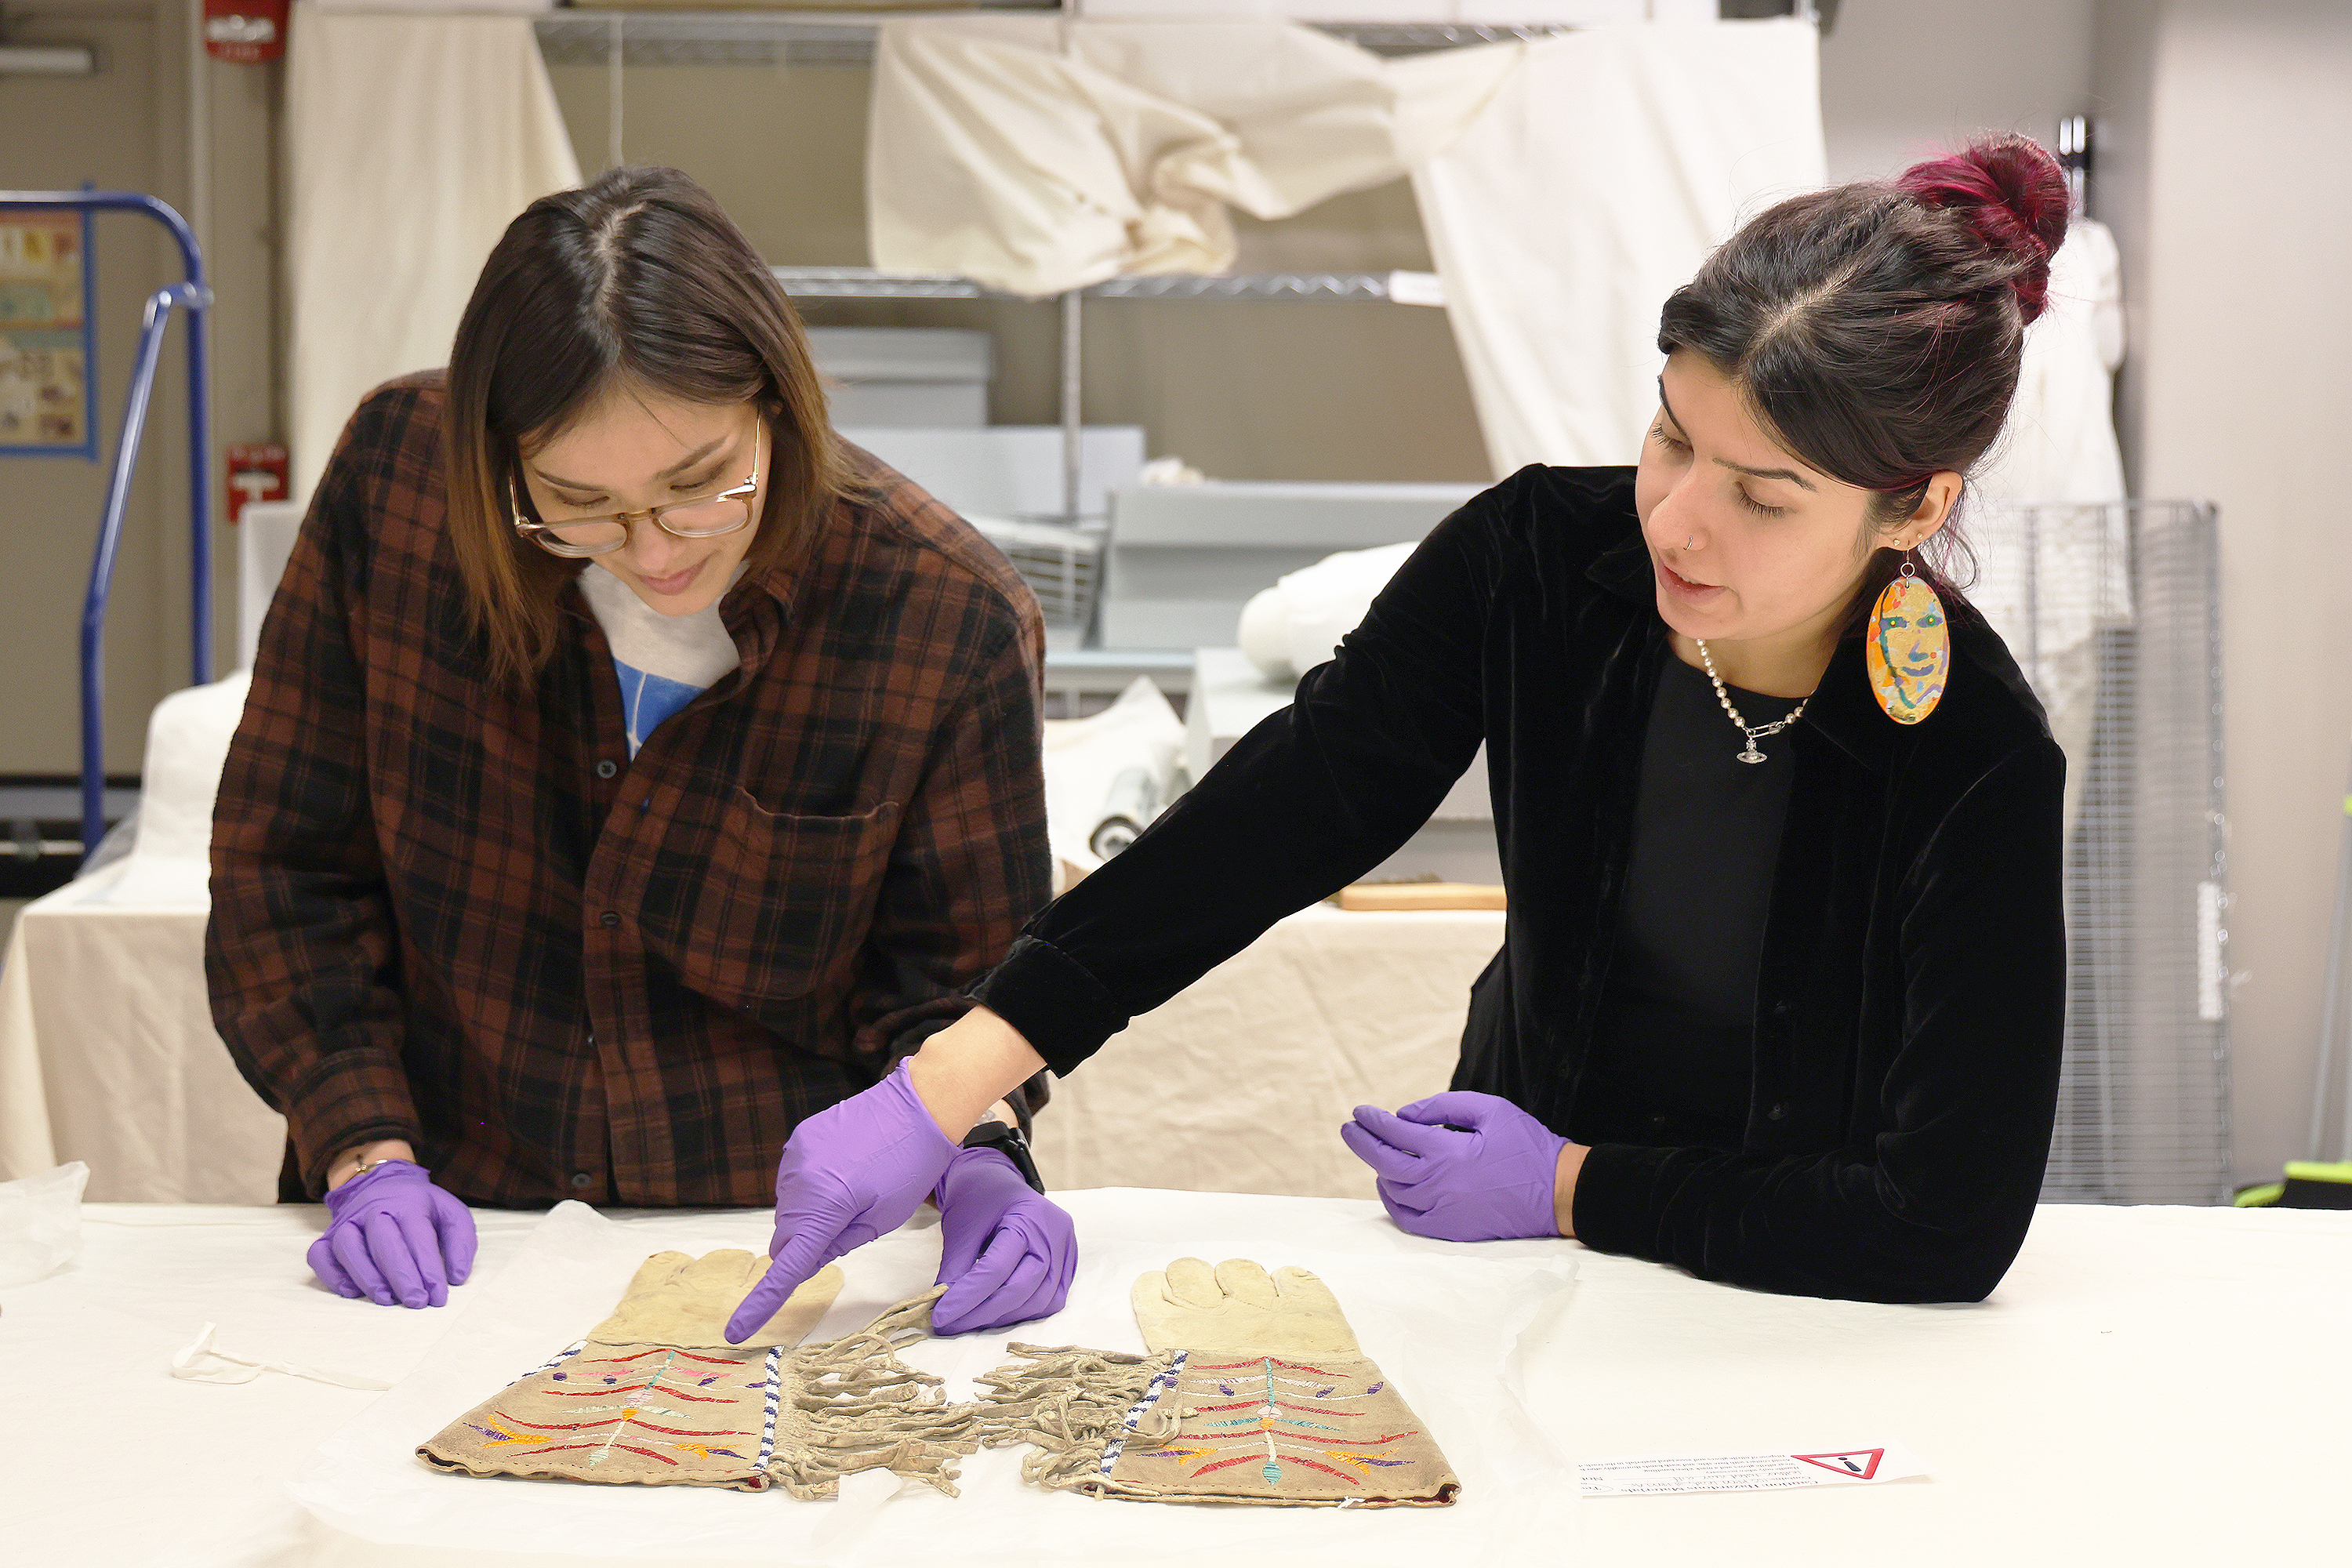 Patton and Brown explore Indigenous items in the collection of the RISD Museum